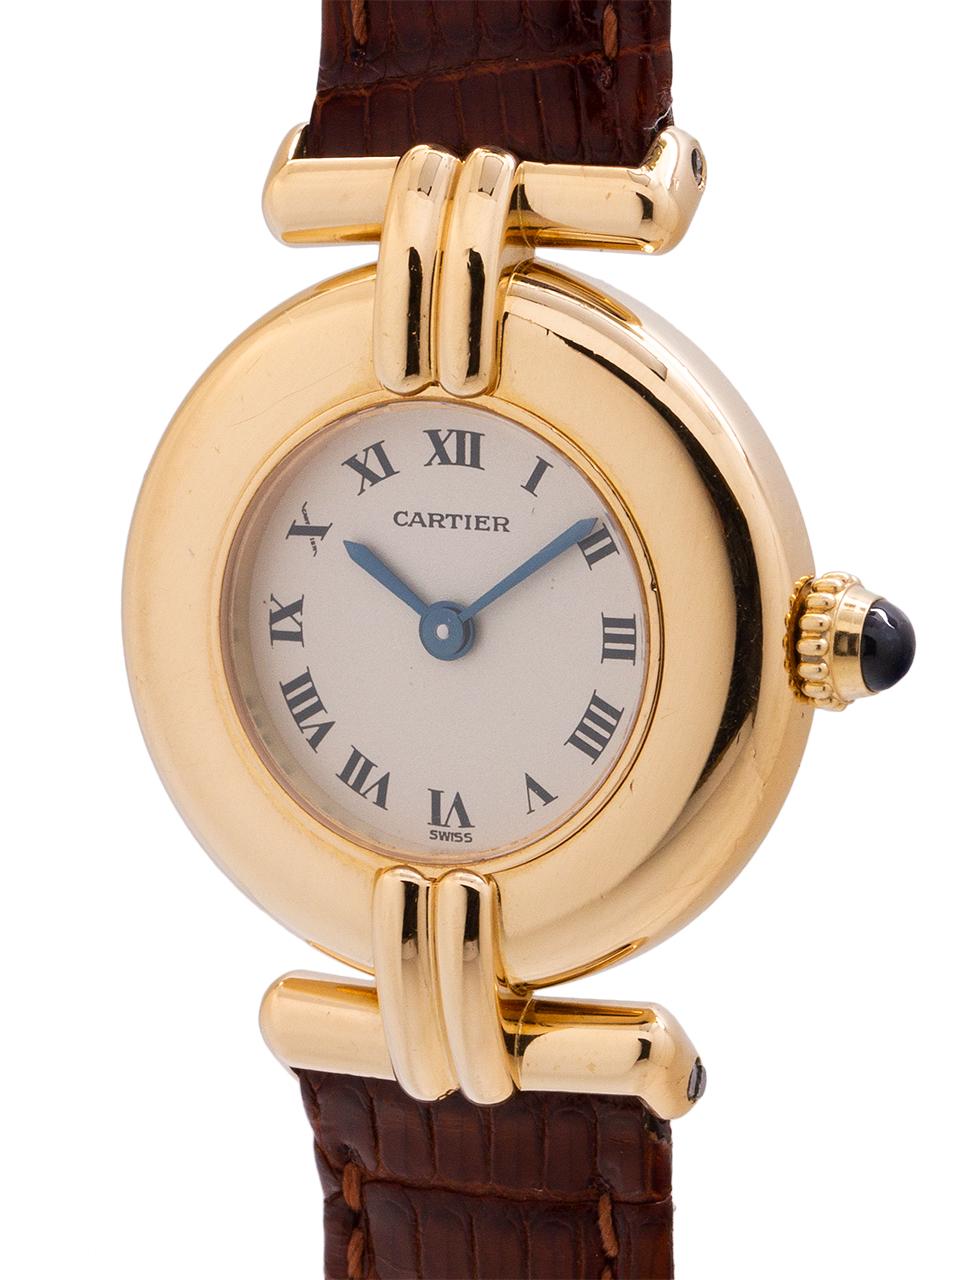 Cartier Lady Colisee 18K yellow gold circa 1990s. Featuring 23 x 31mm round case with wide dome bezel, sapphire crystal, silvered dial with black Roman figures. Battery powered quartz movement with cabochon sapphire crown. An attractive lady’s